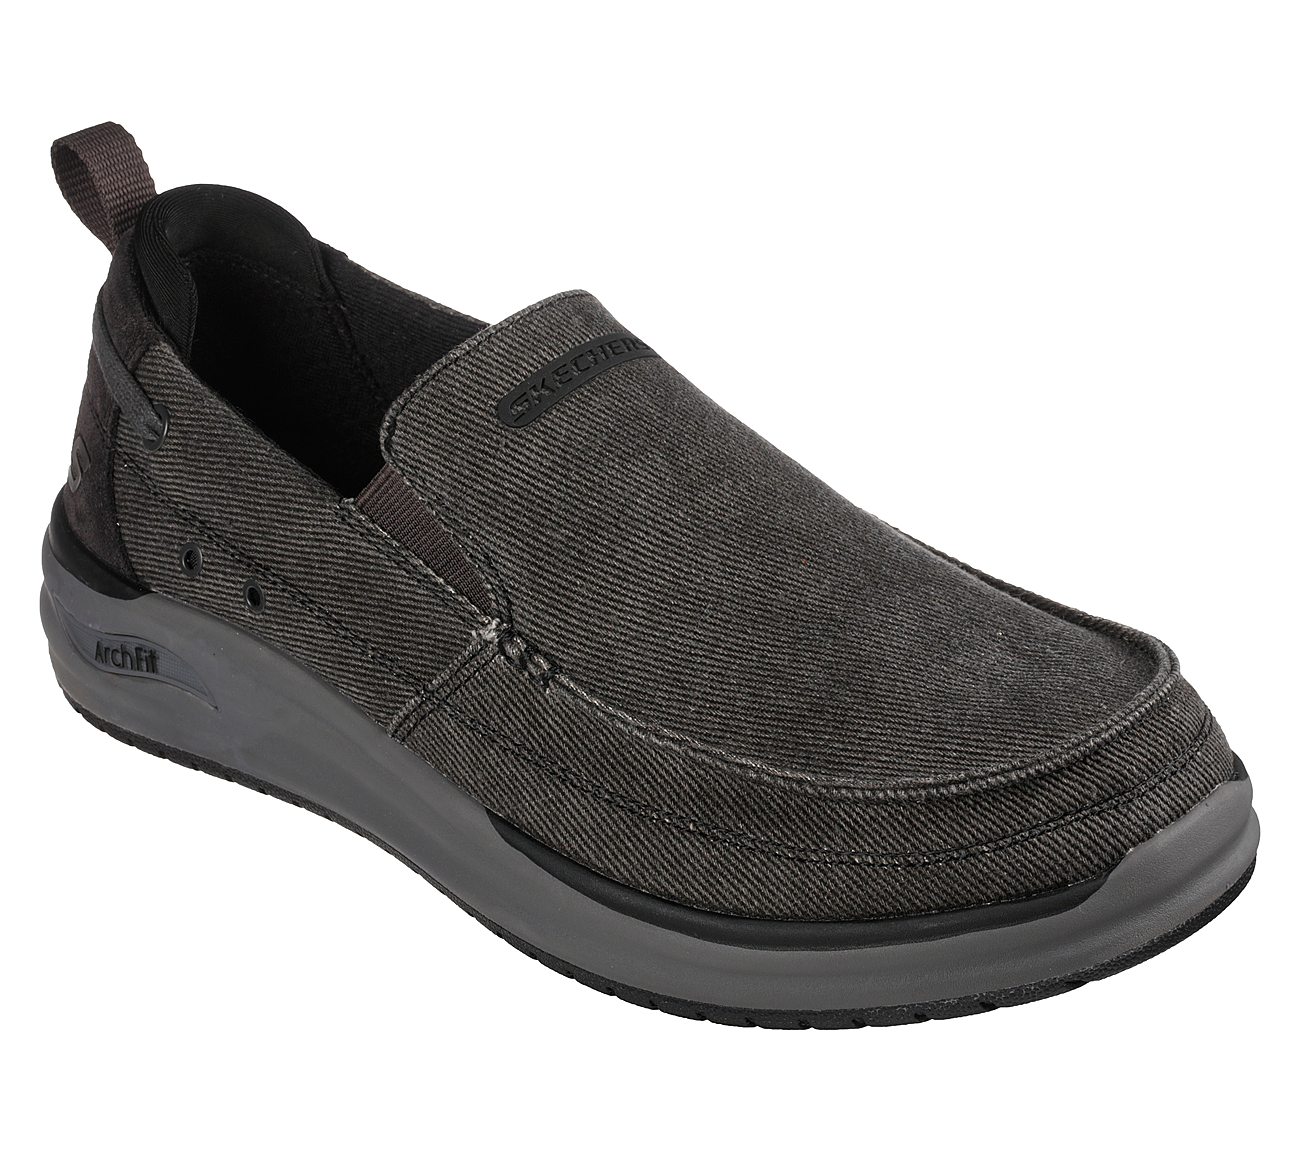 ARCH FIT MELO - PORT BOW,  Footwear Lateral View